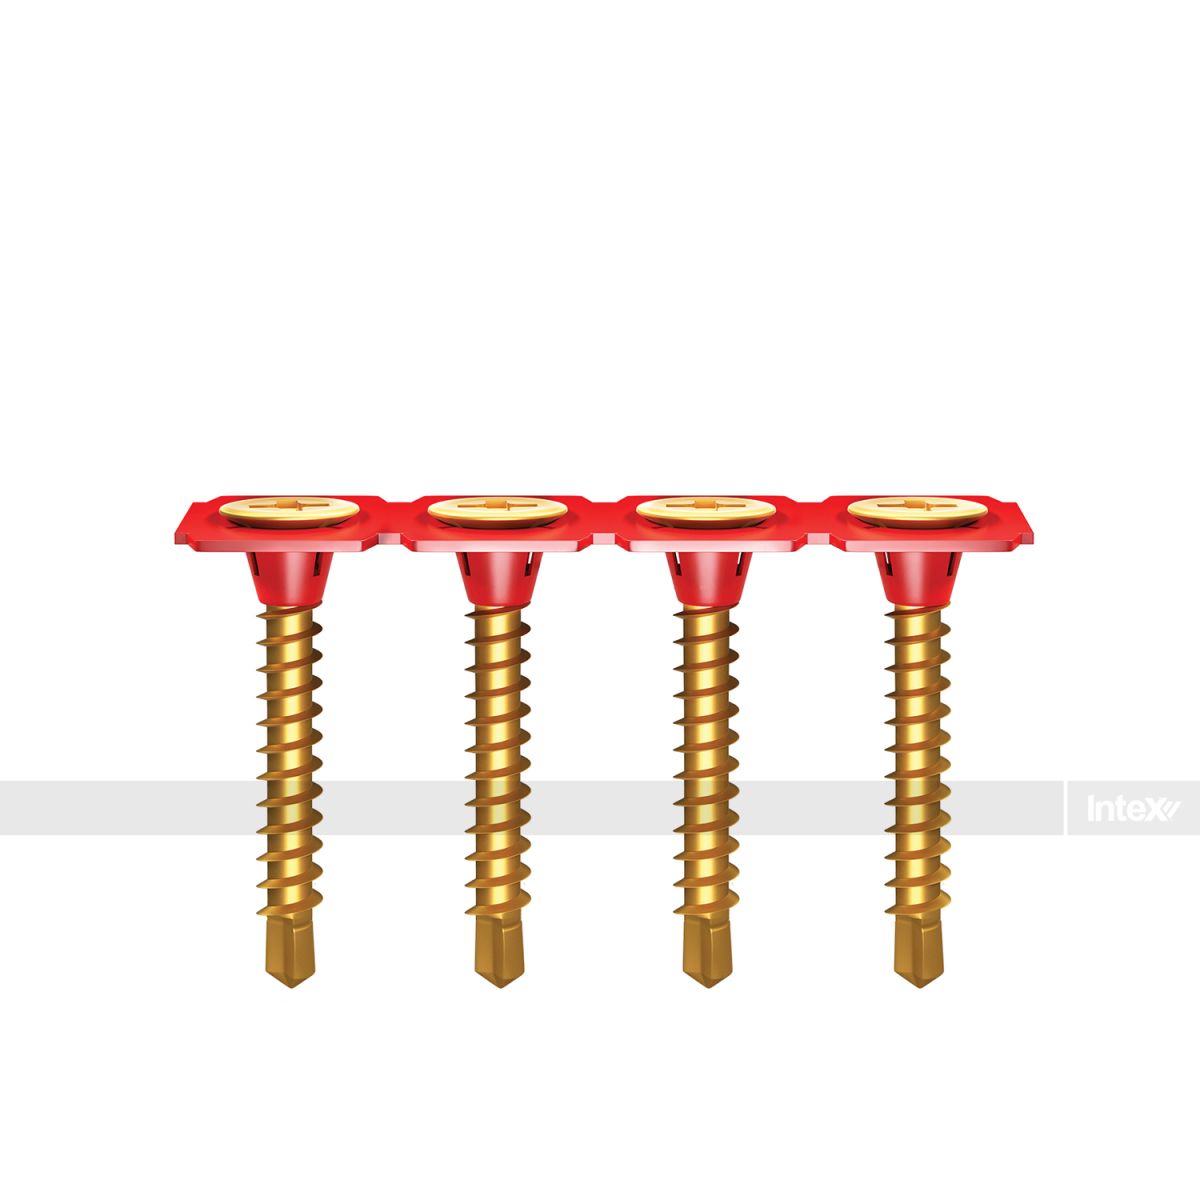 Intex 0.8 - 2.3mm Thick Metal Collated Screws